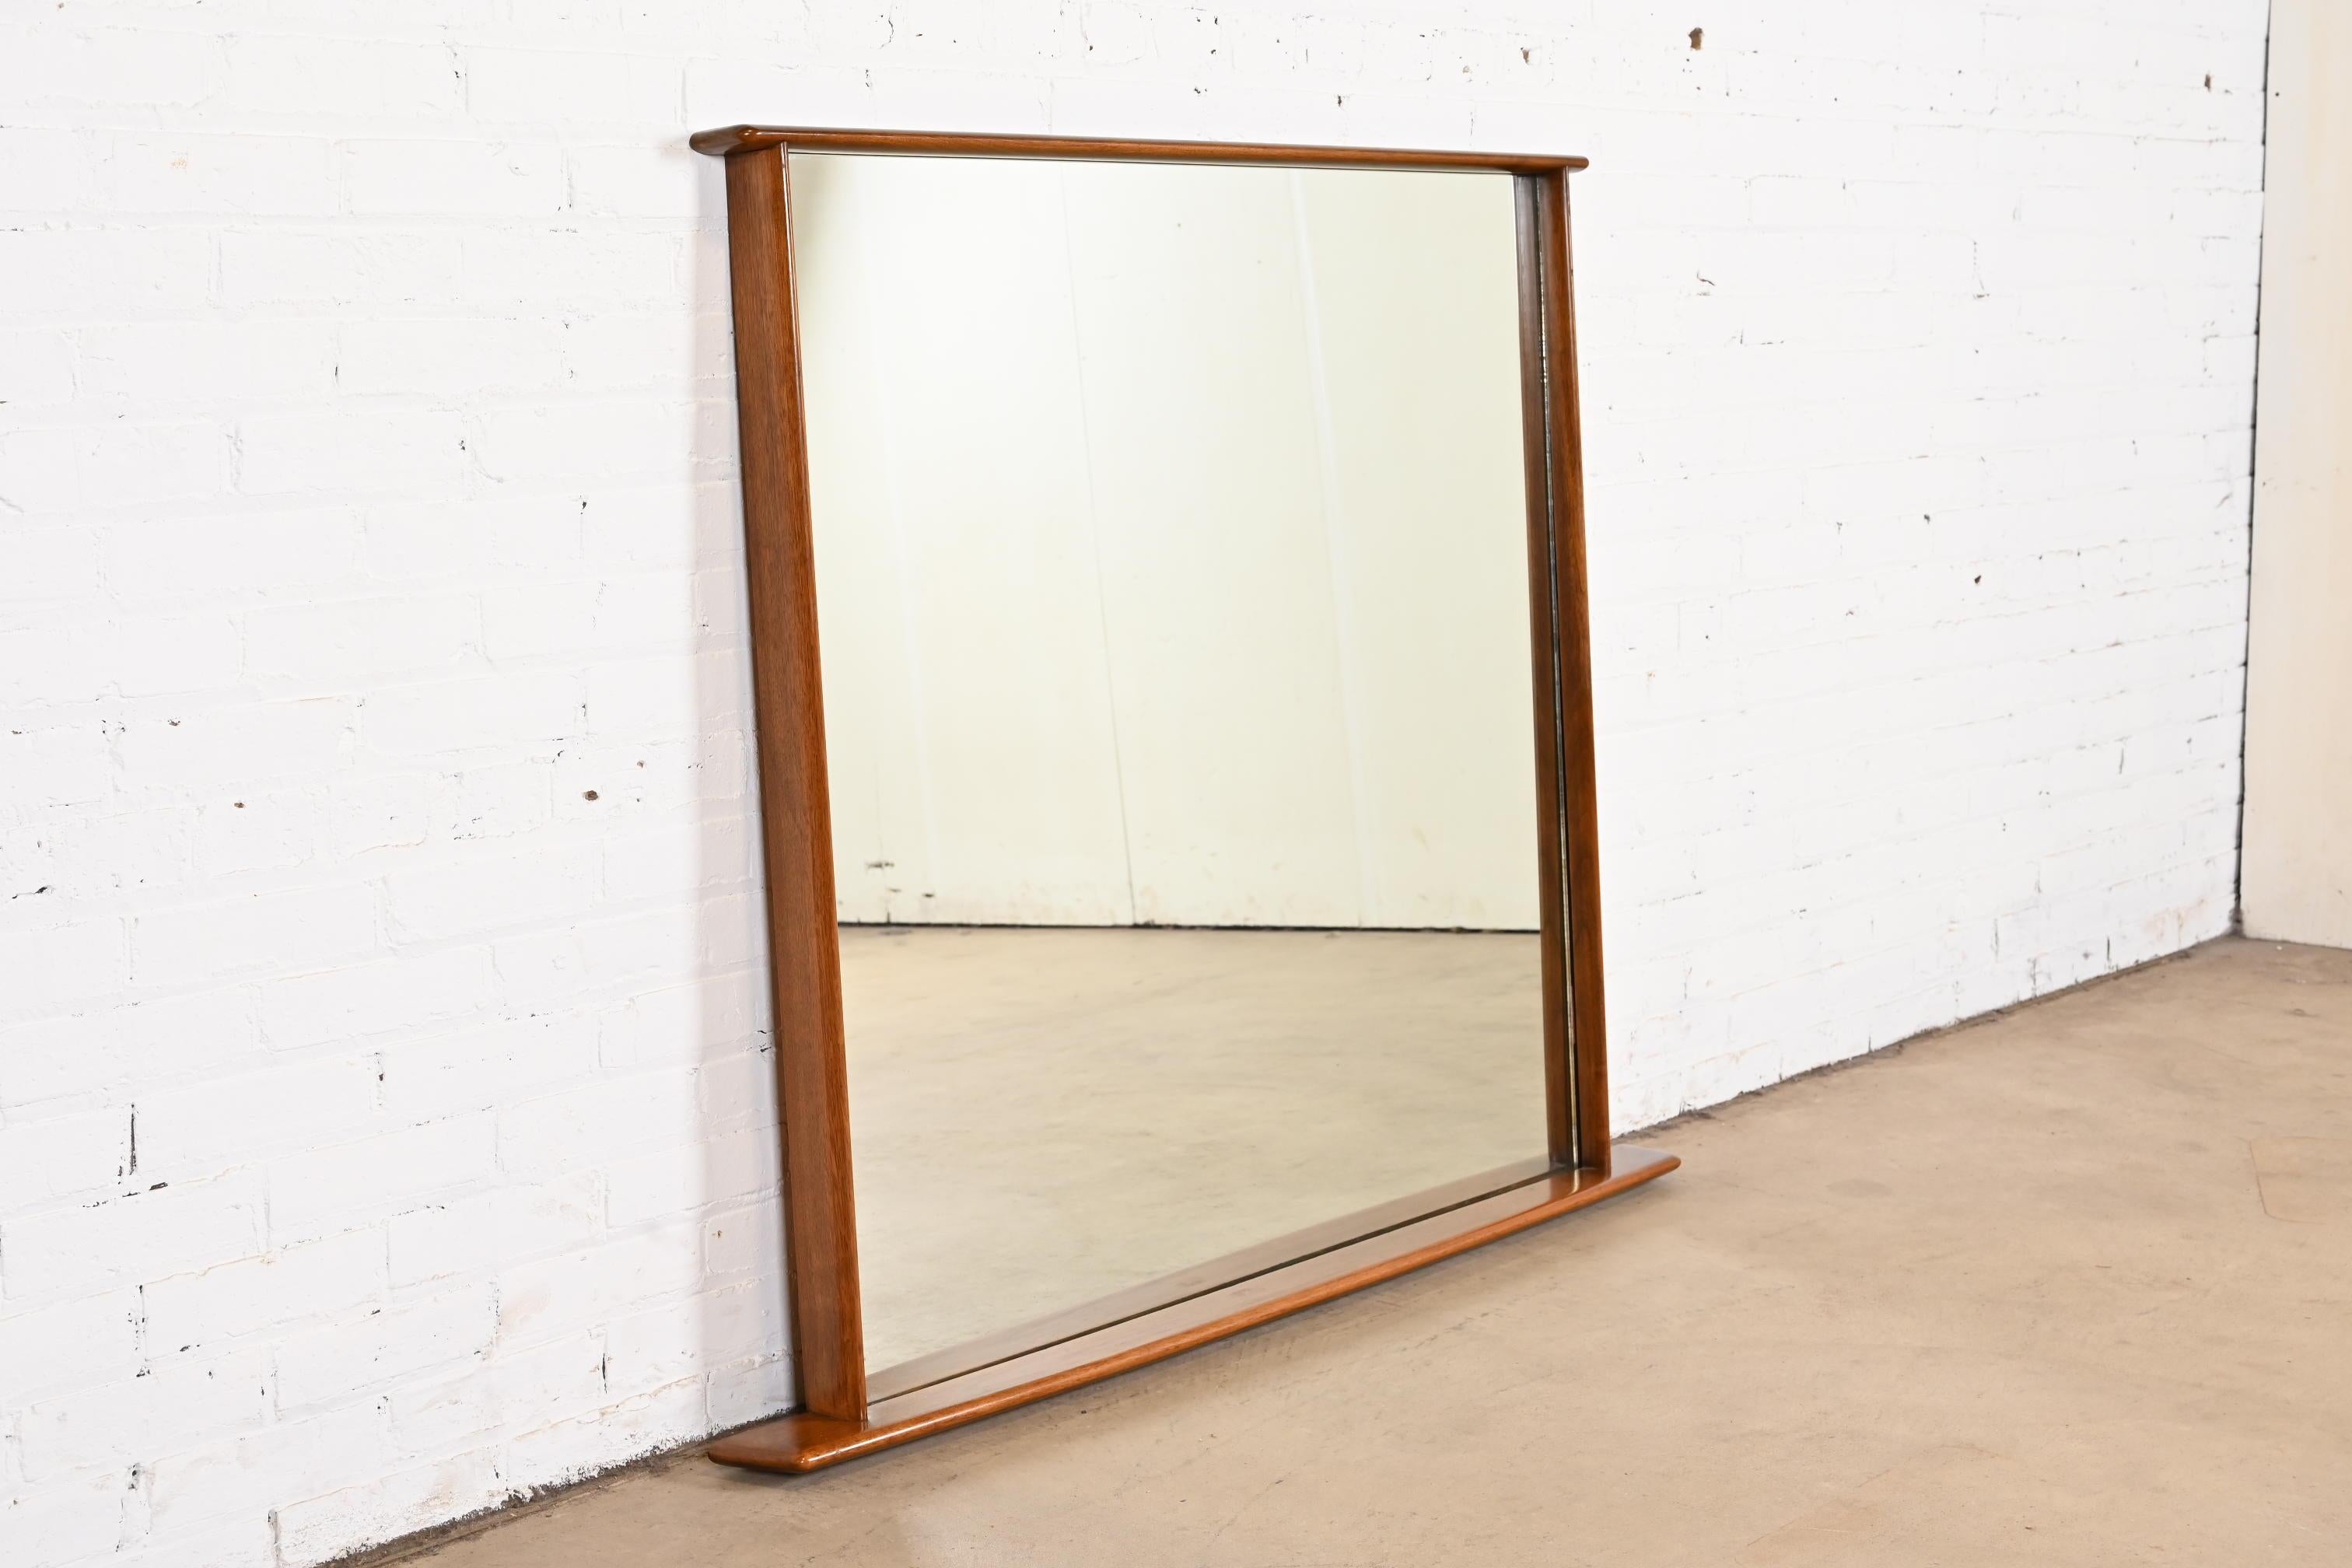 A very rare and exceptional mid-century Organic Modern sculpted walnut framed monumental wall mirror

By George Nakashima for Widdicomb Furniture, 